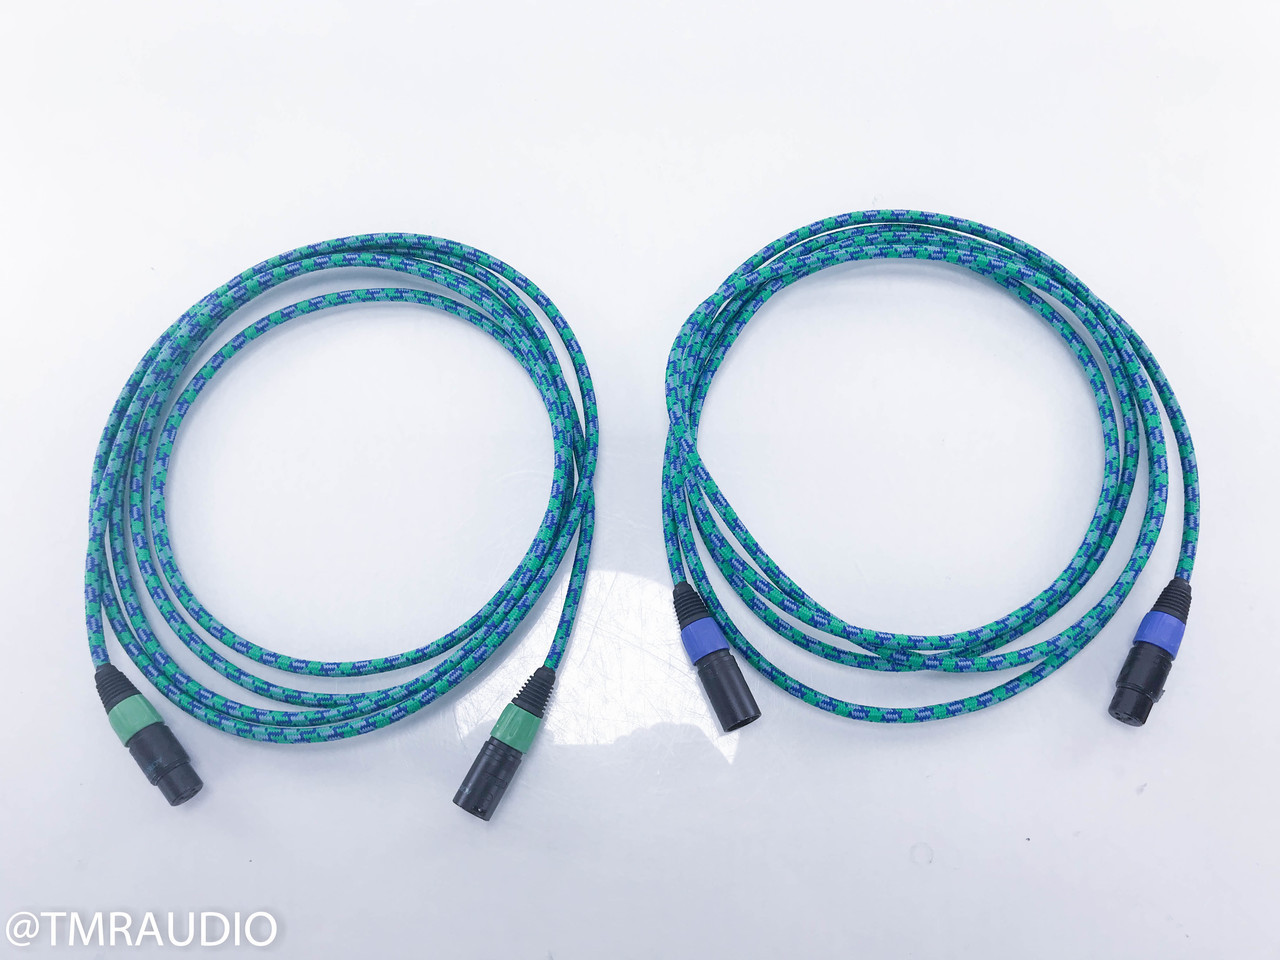 Acrotec 6N-A2030 XLR Cables; 3.5m Pair Balanced Interconnects